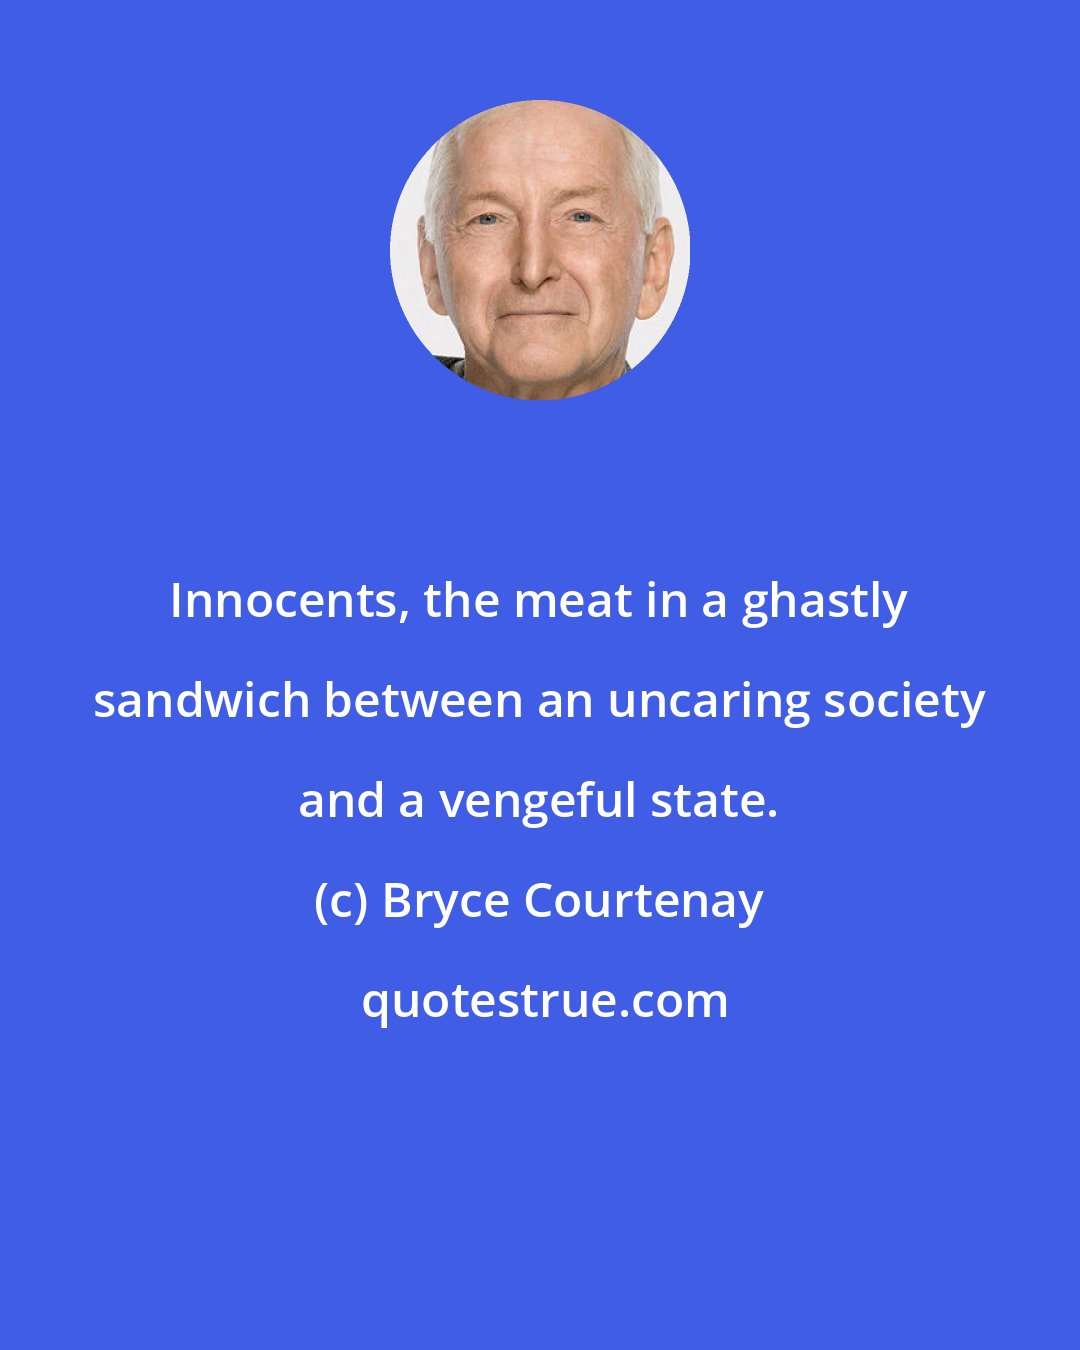 Bryce Courtenay: Innocents, the meat in a ghastly sandwich between an uncaring society and a vengeful state.